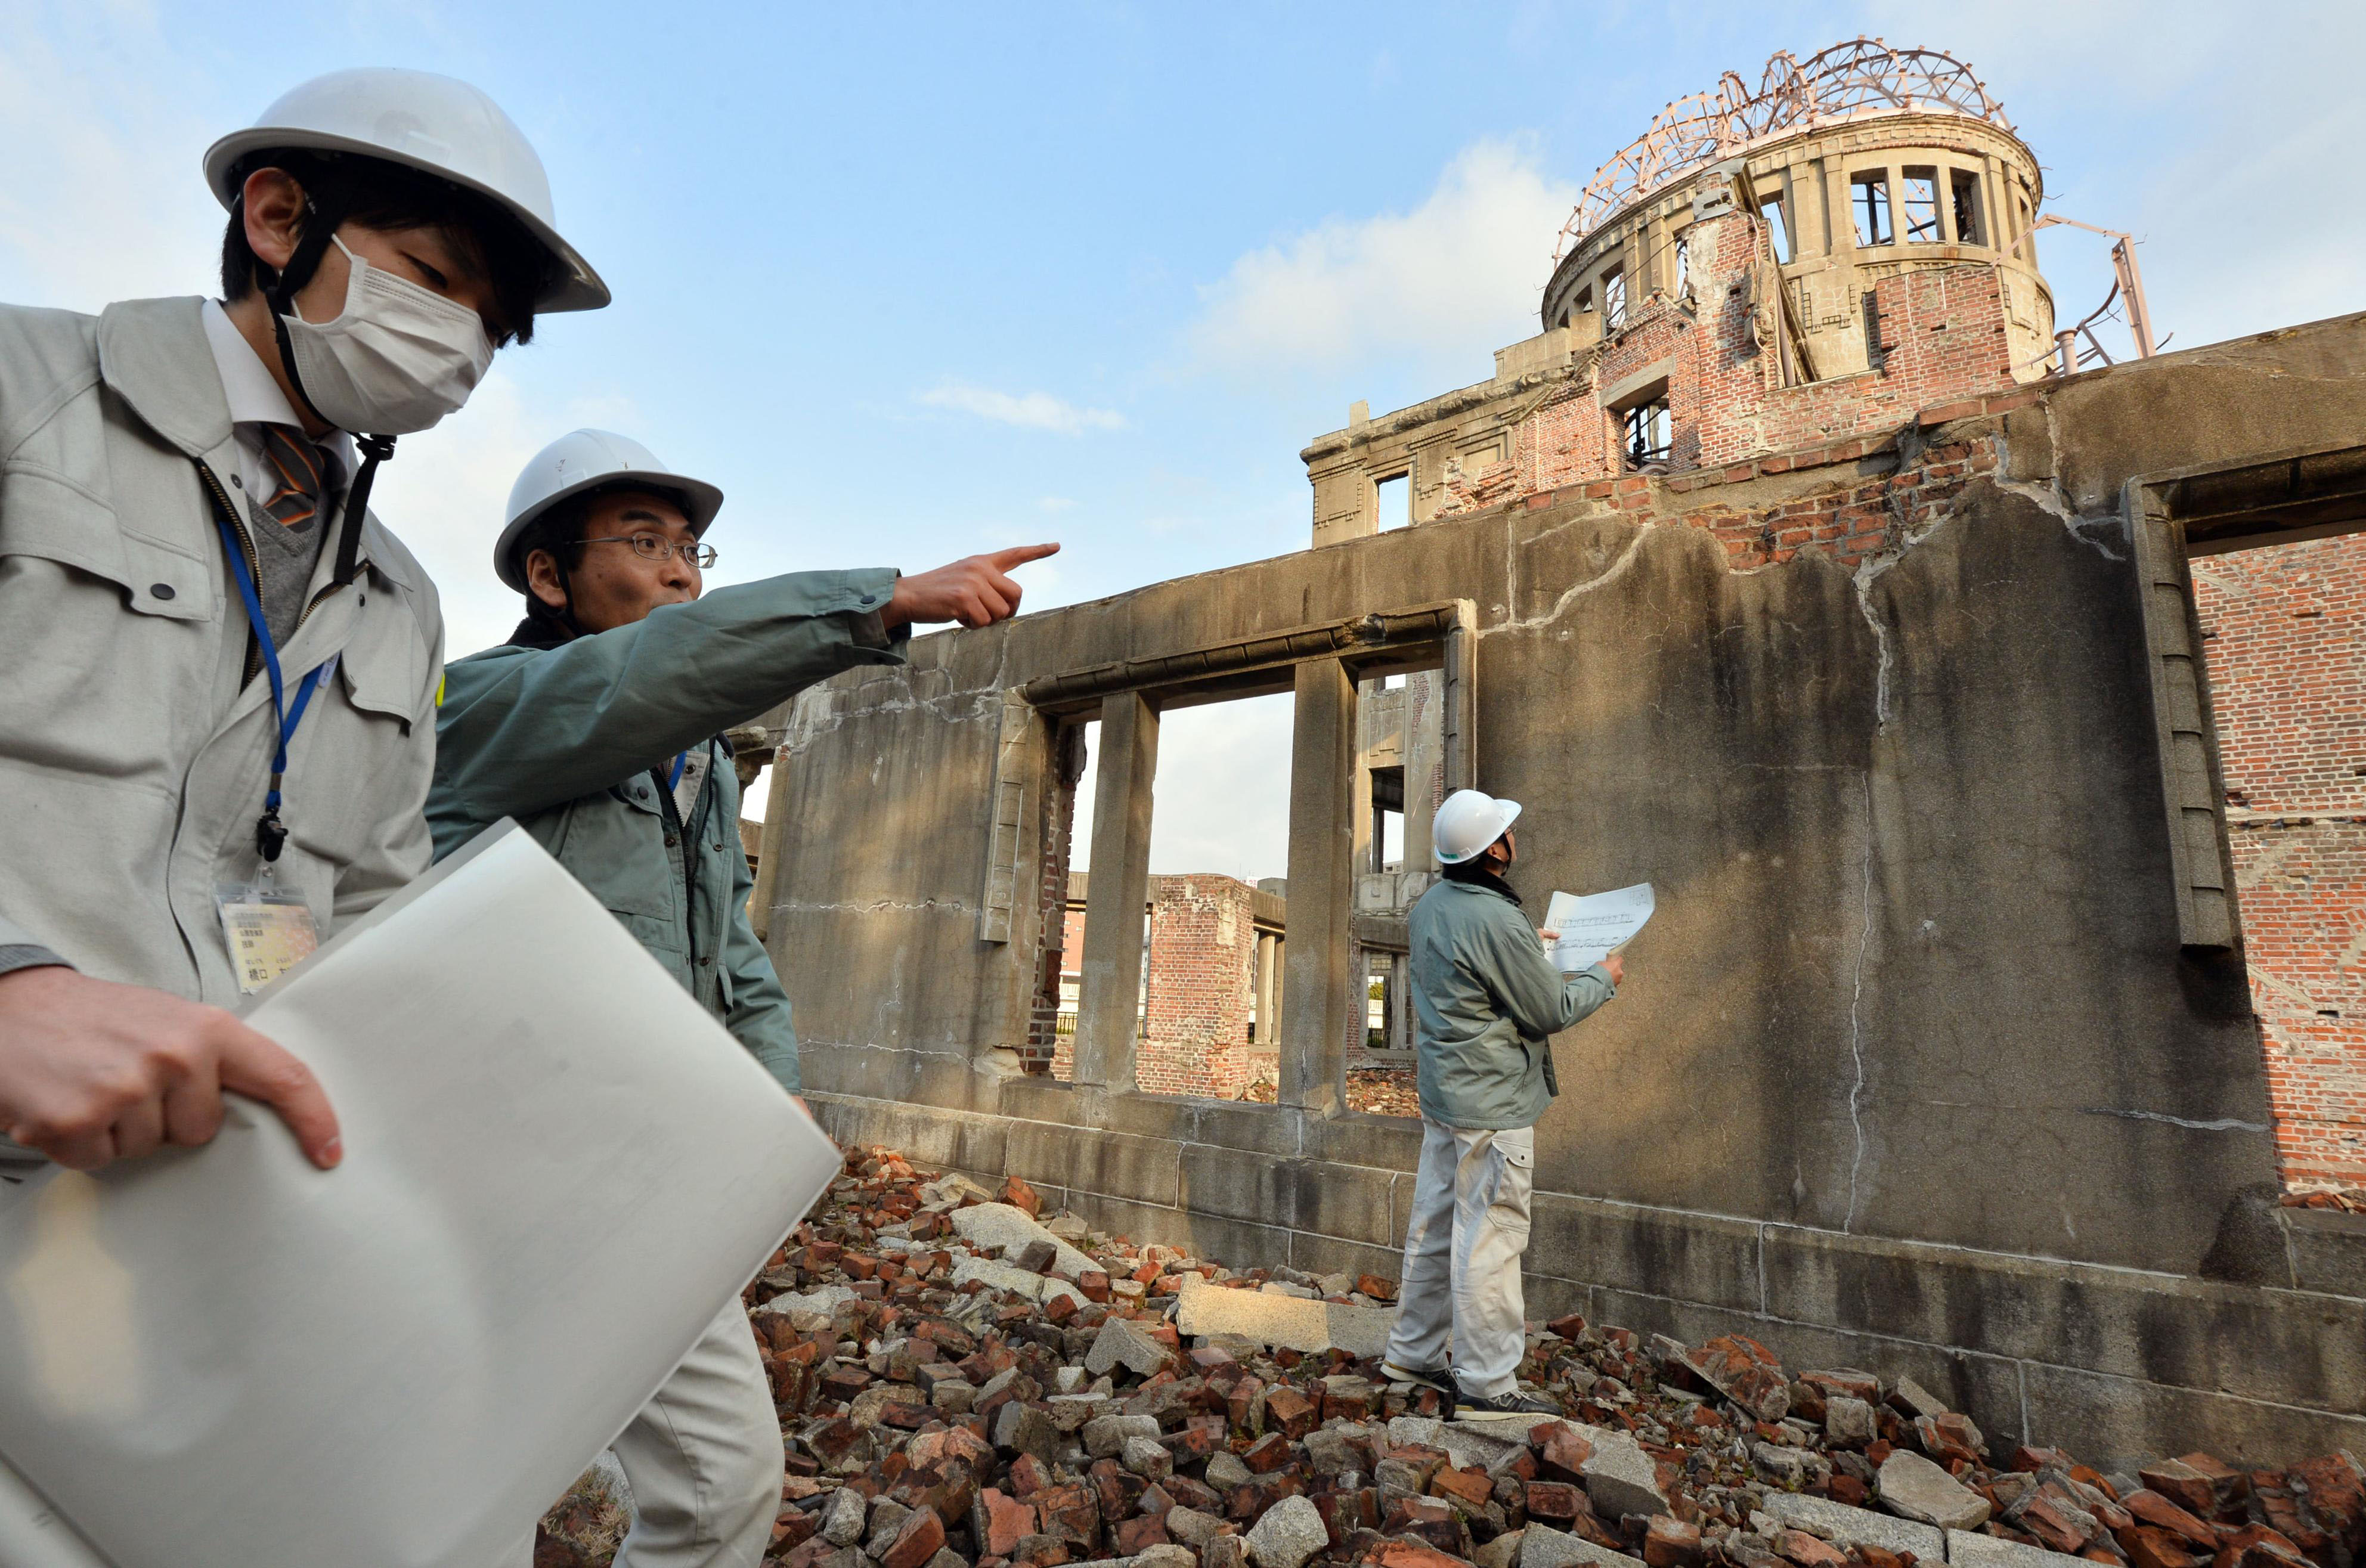 The Hiroshima A-Bomb Dome is surveyed in March last year. Experts from the U.S. and Japan are exploring ways to disclose key online hibakusha archival collections. | KYODO